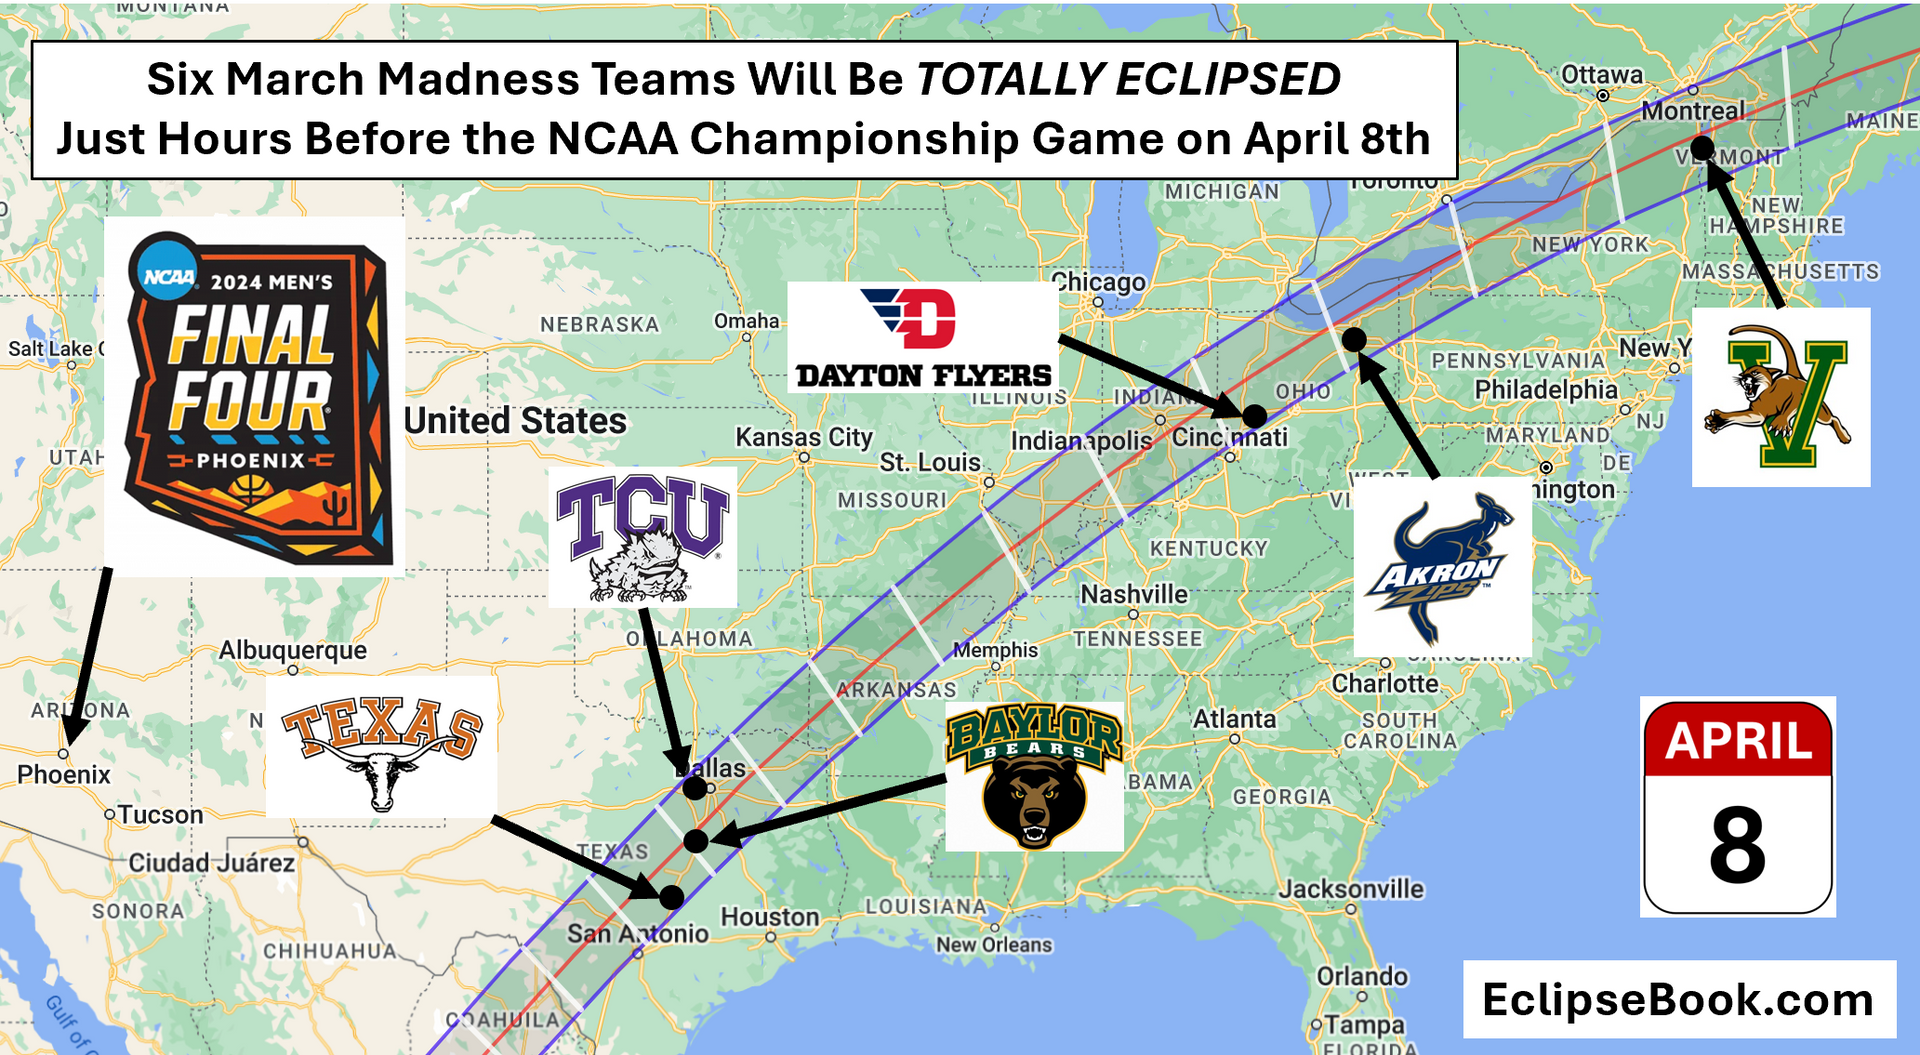 6 March Madness Teams Will Be TOTALLY ECLIPSED Just Hours Before the NCAA Championship Game April 8